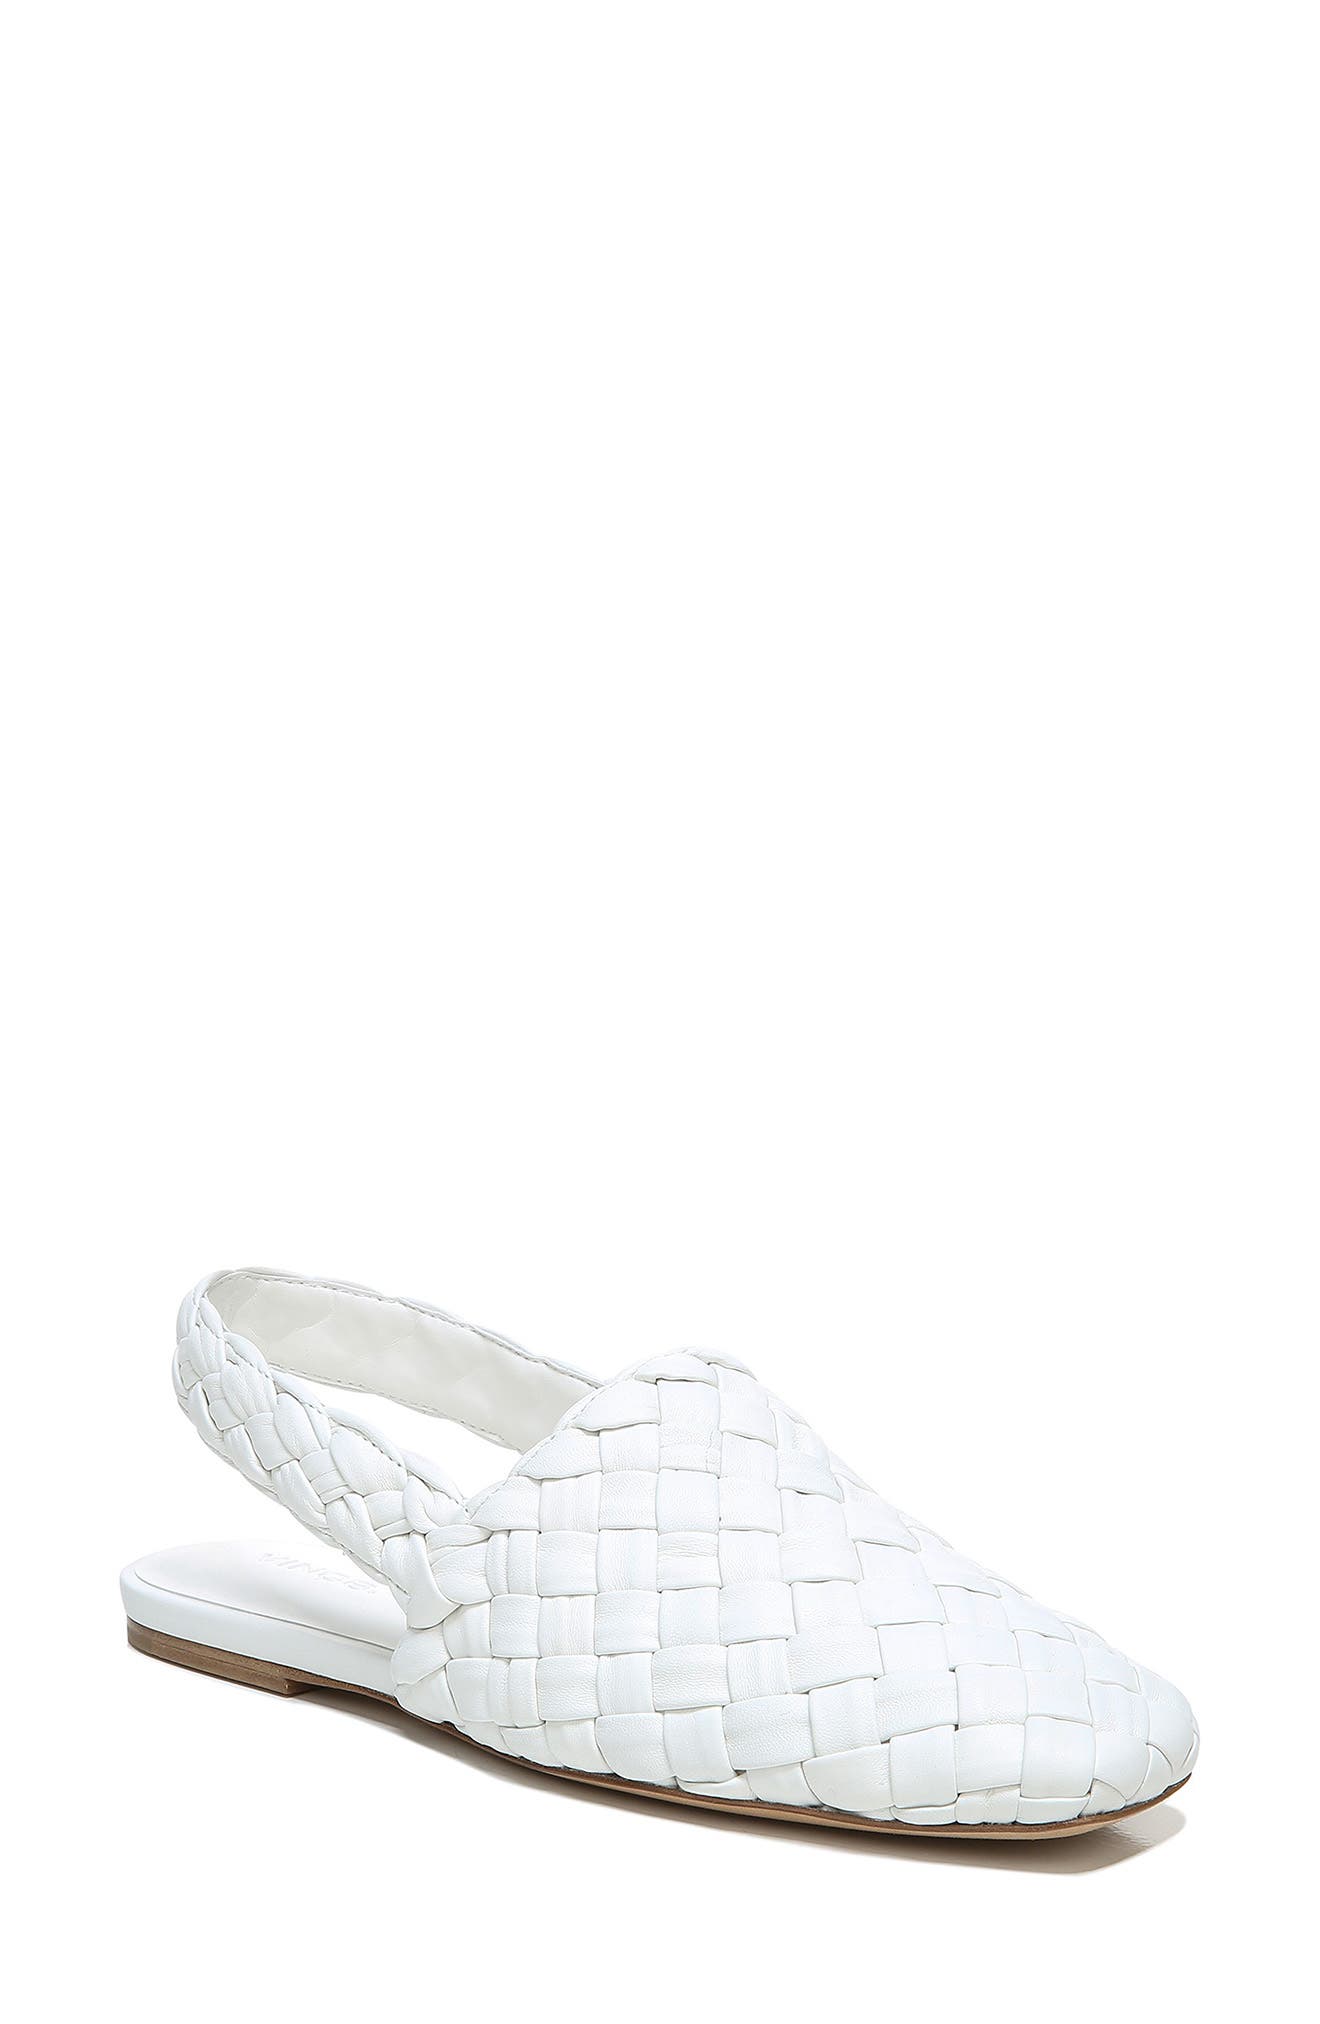 Vince Cadot Slingback Flat in Off White at Nordstrom